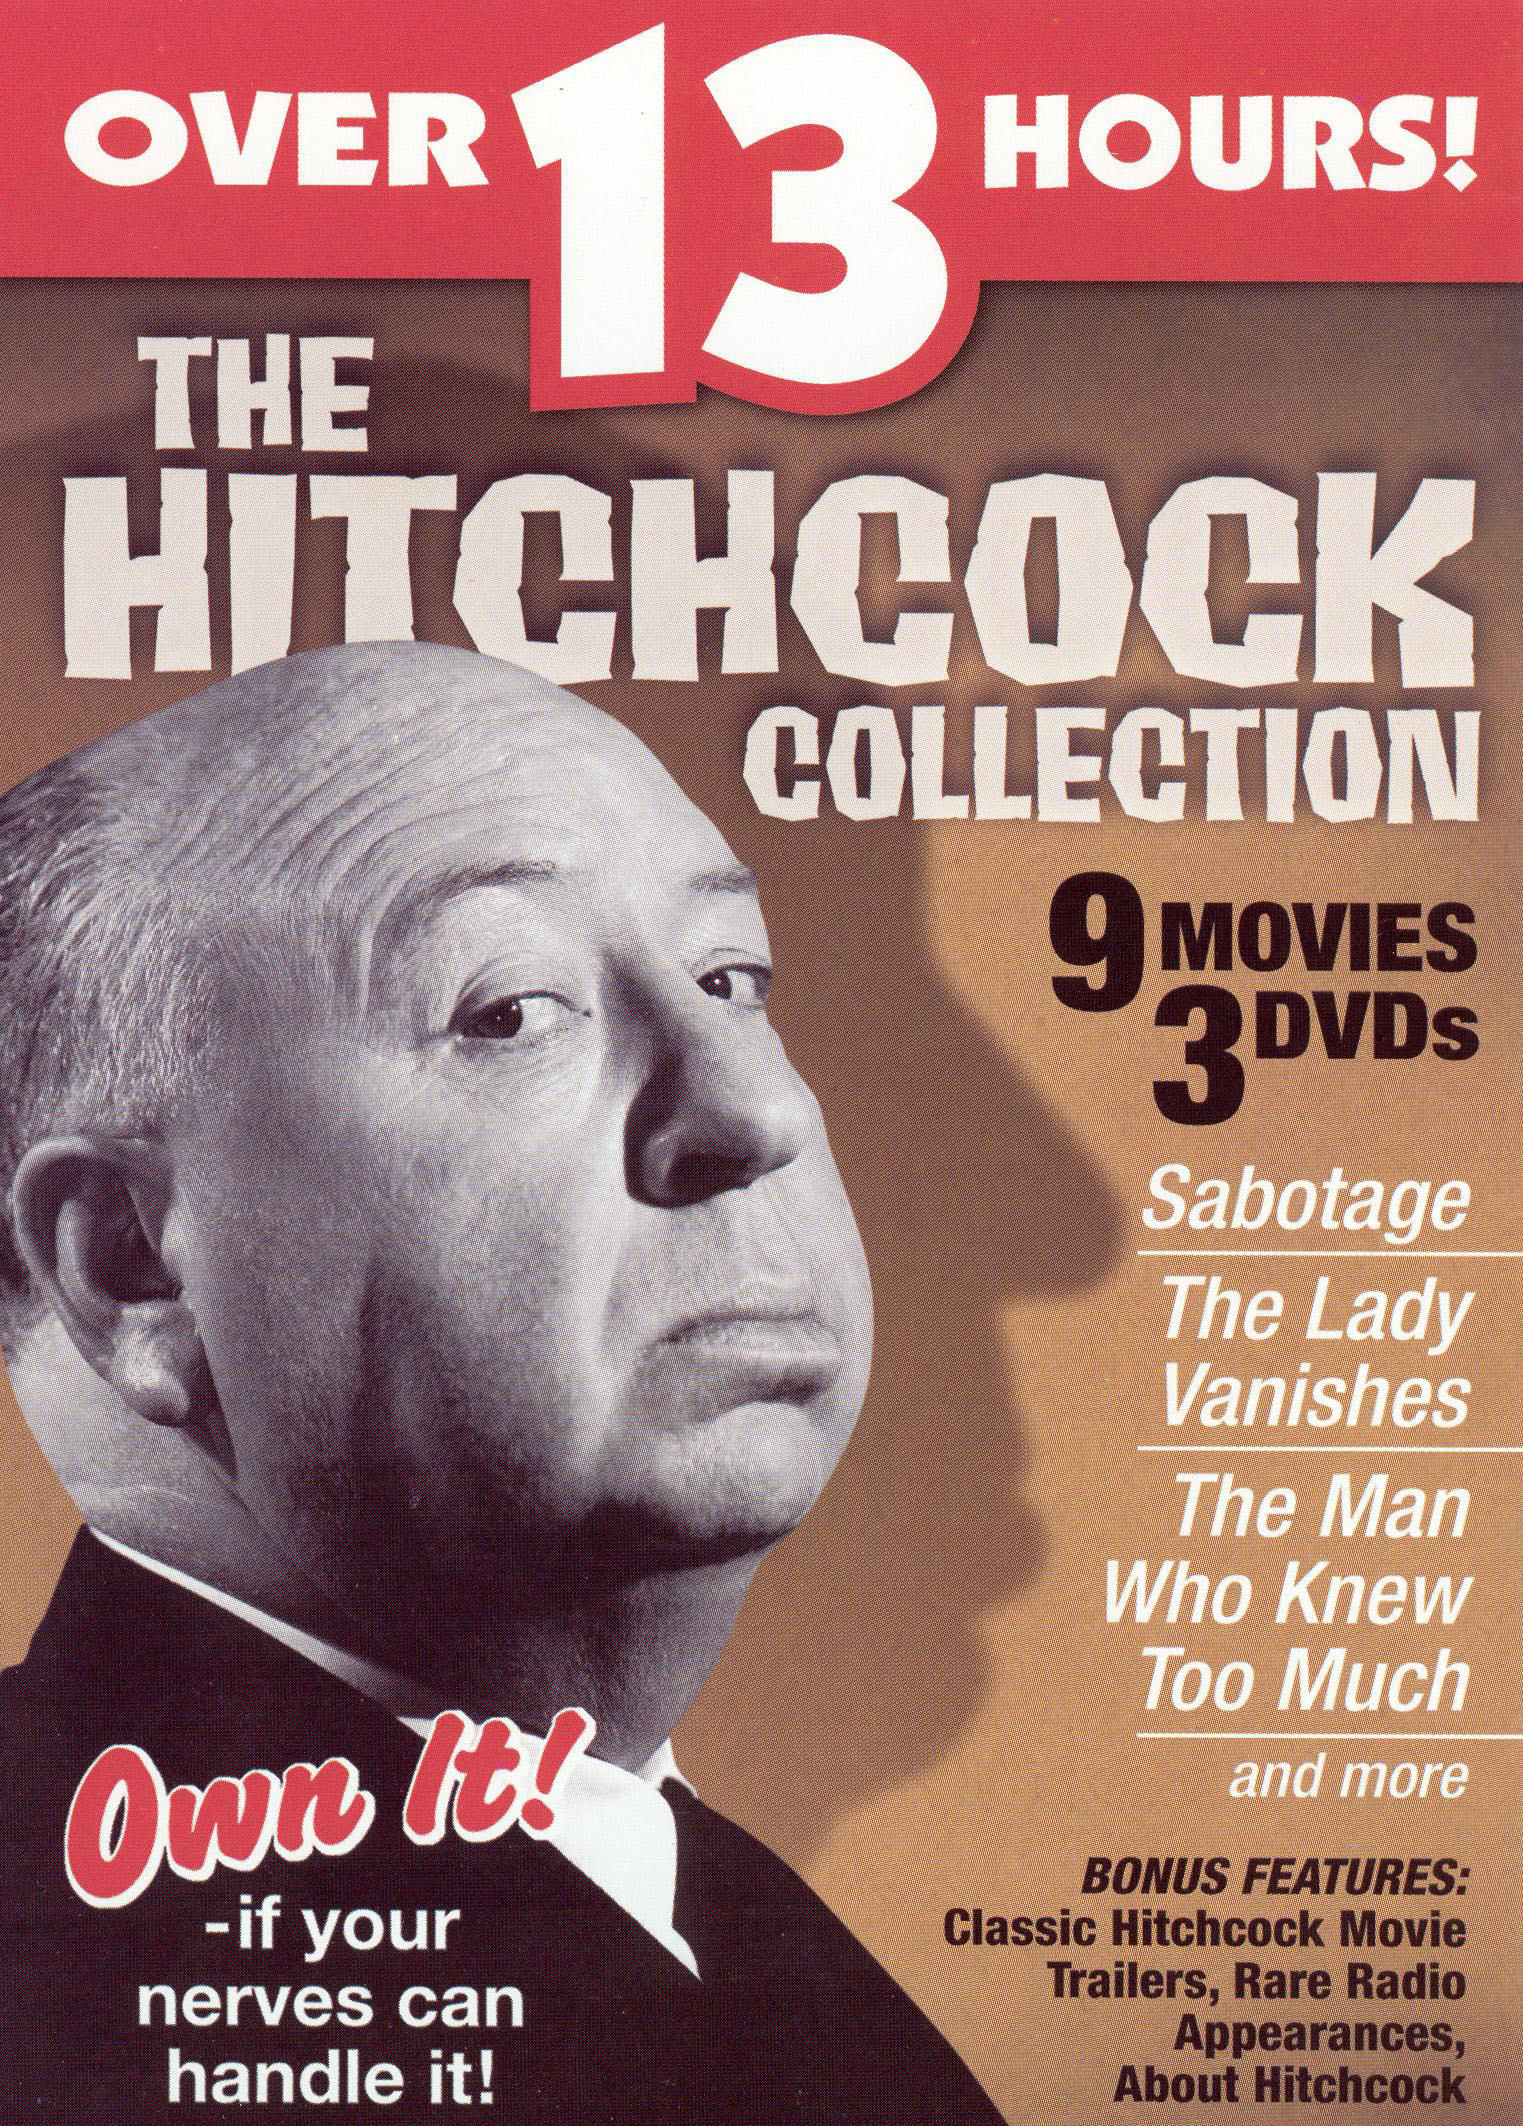 Bootlegs Galore: The Great Alfred Hitchcock Rip-off – Brenton Film